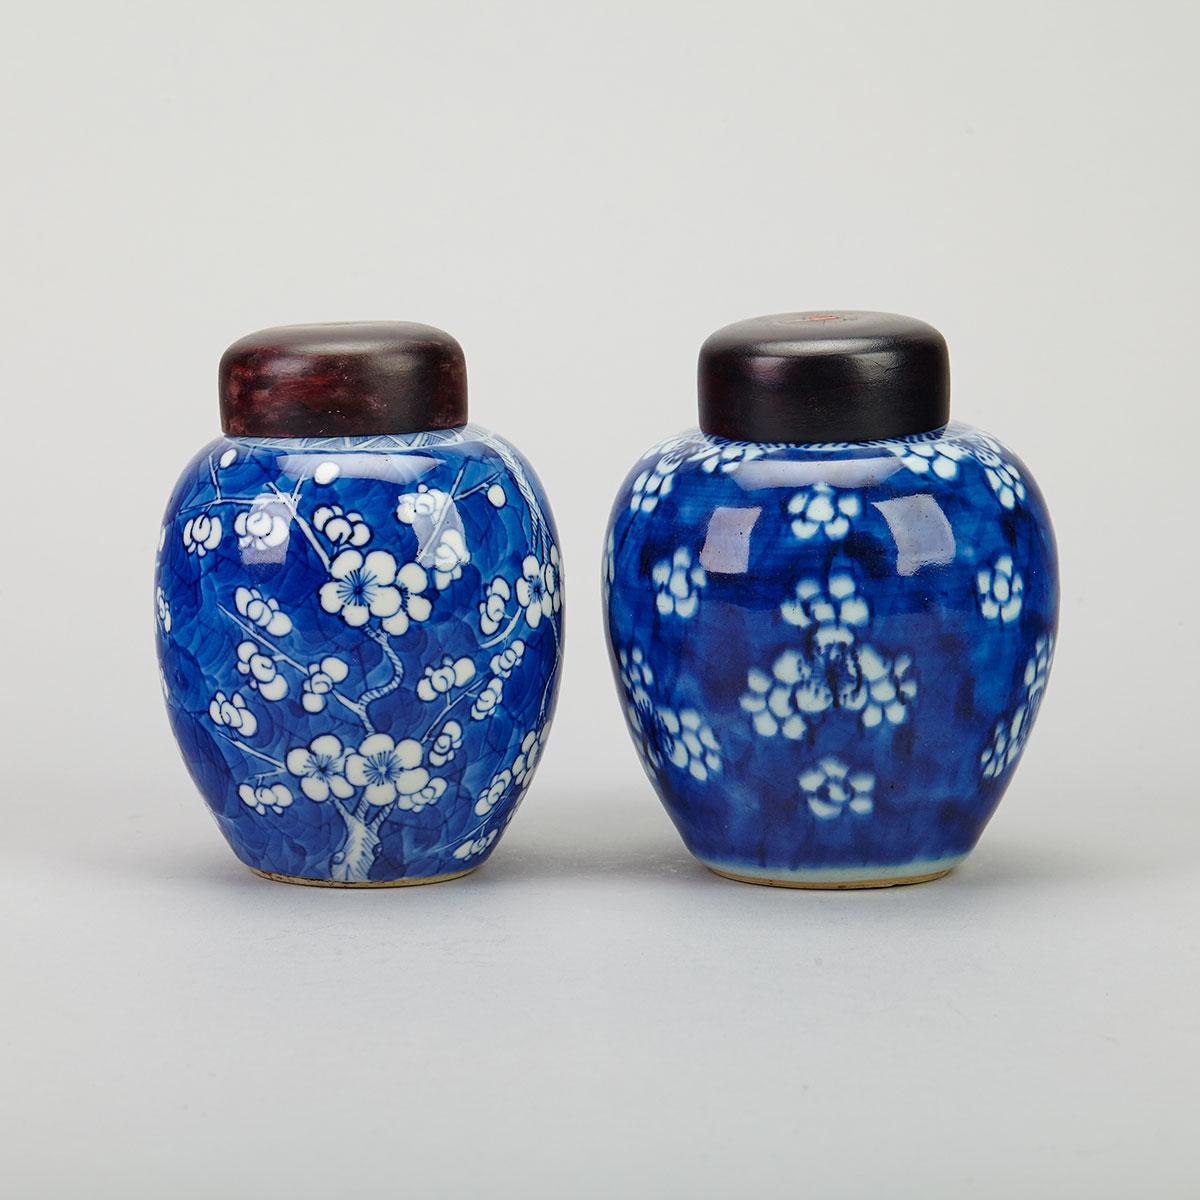 Two Export Blue and White Ginger Jars, Kangxi Period (1662-1722)